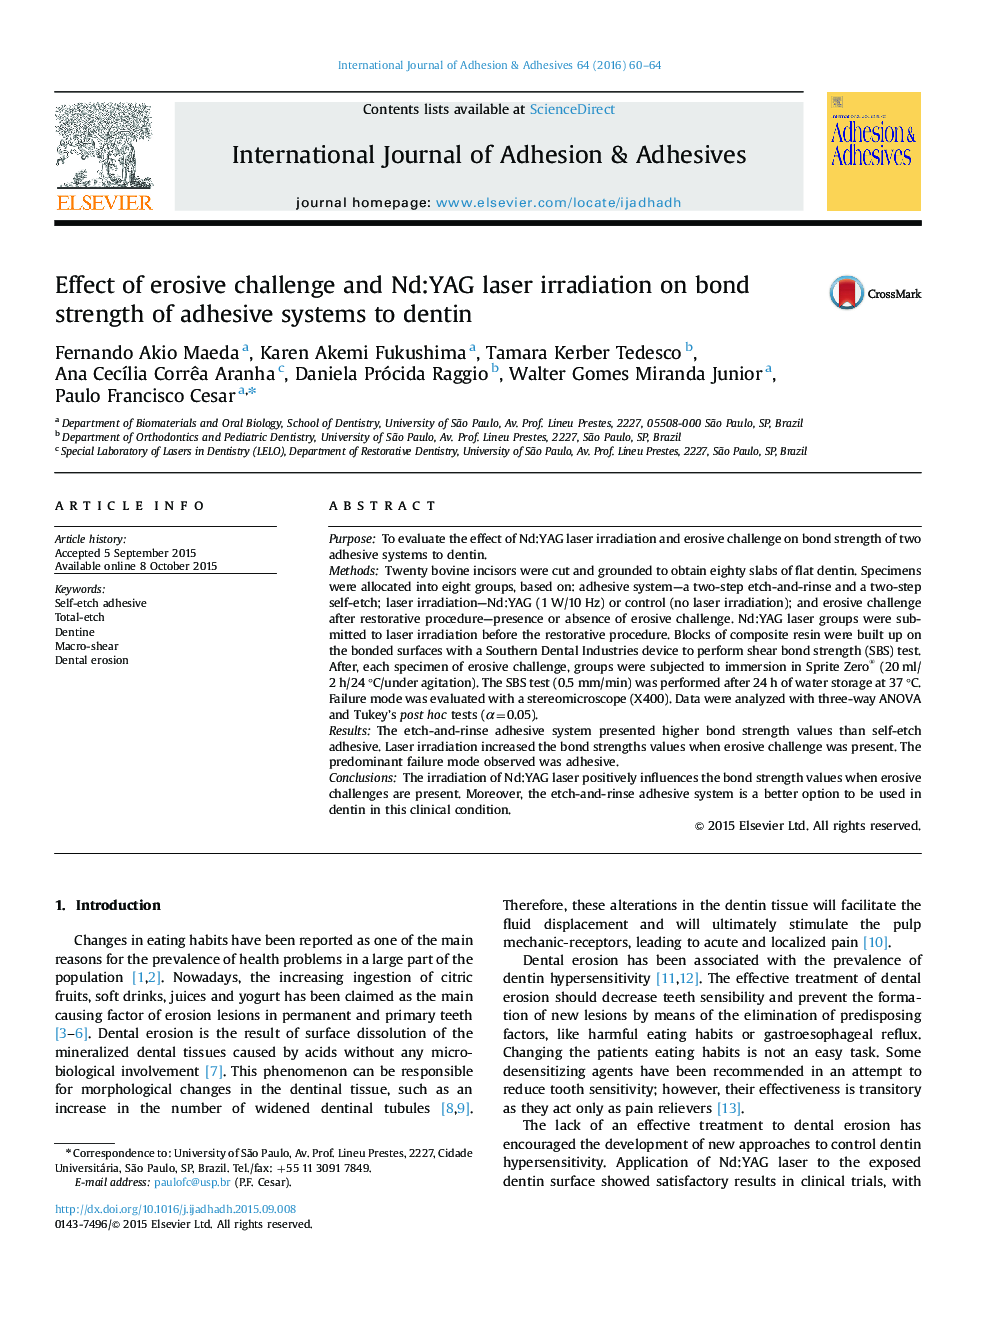 Effect of erosive challenge and Nd:YAG laser irradiation on bond strength of adhesive systems to dentin